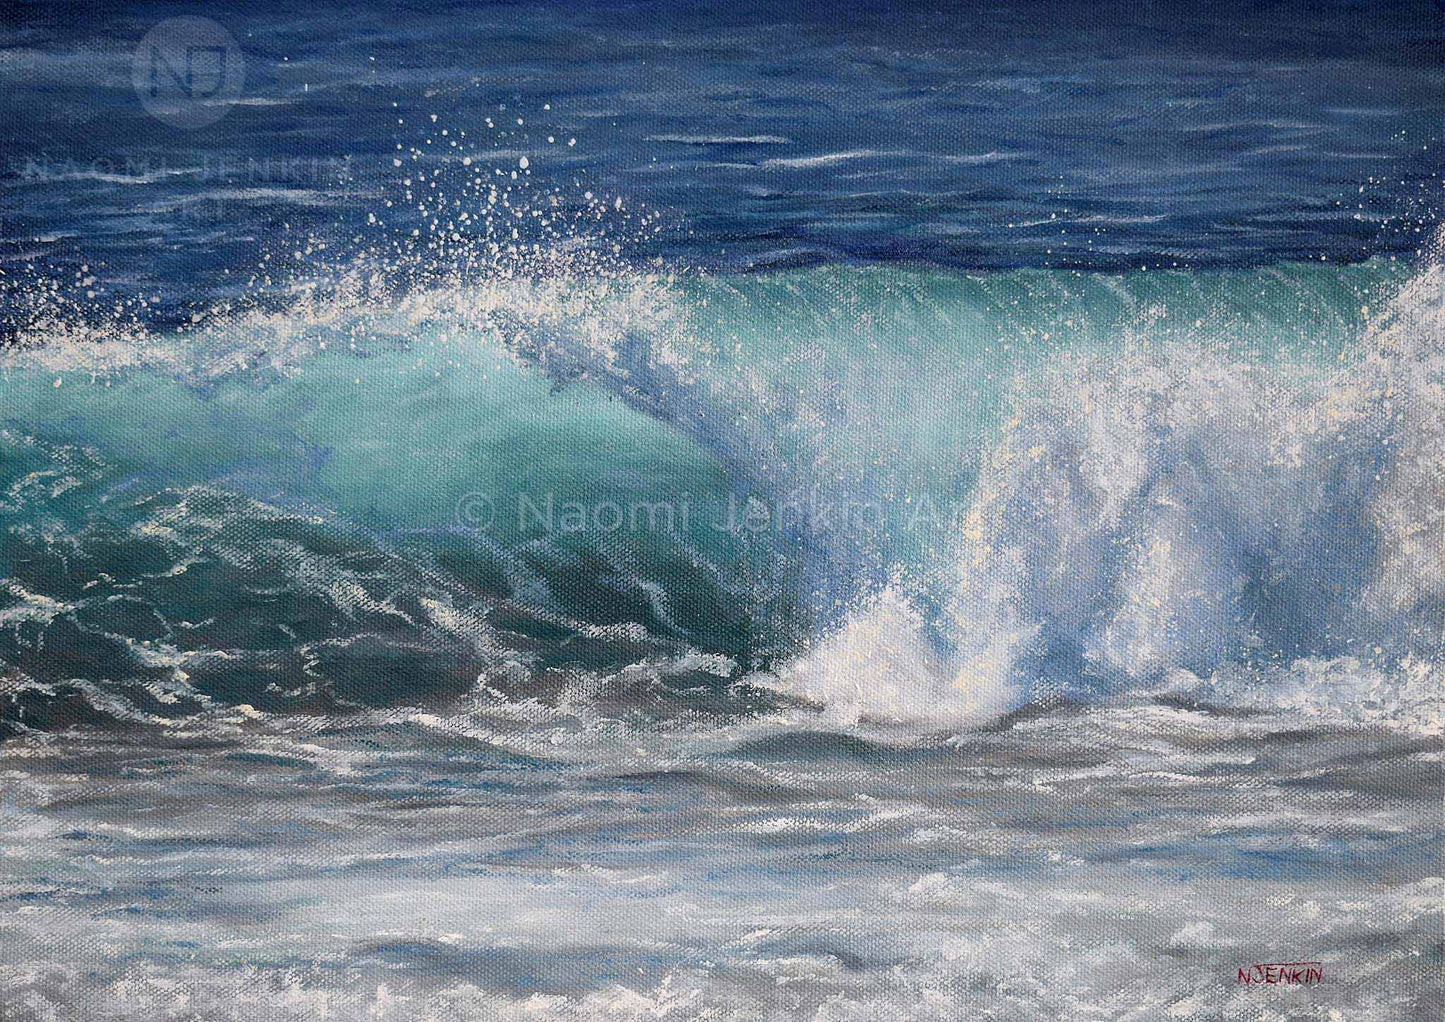 Close up of a wave painting from the print 'Summer Beachbreak' by Naomi Jenkin